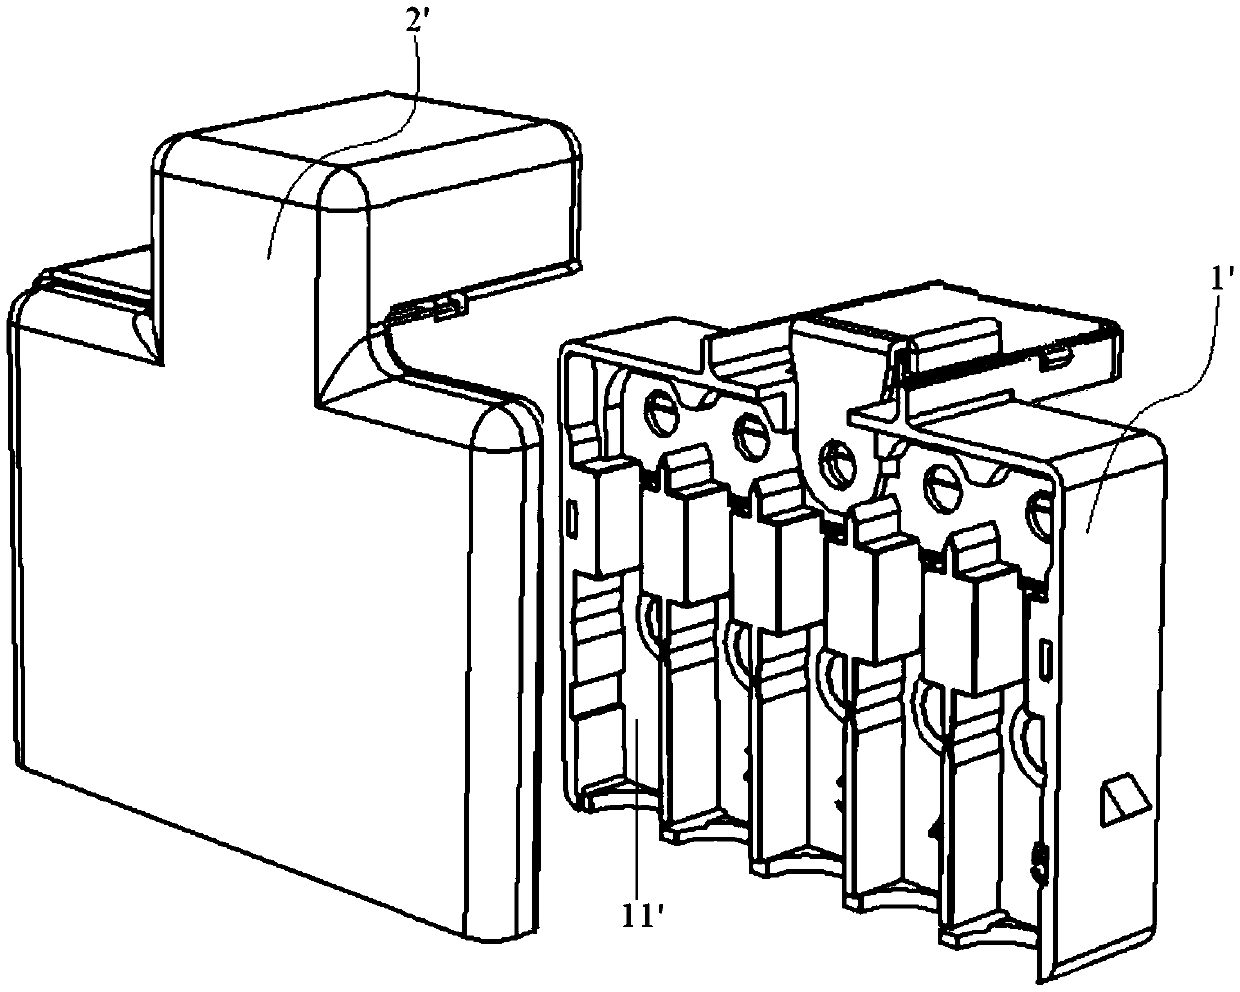 Positive-electrode joint fuse box and assembly for automobile storage battery